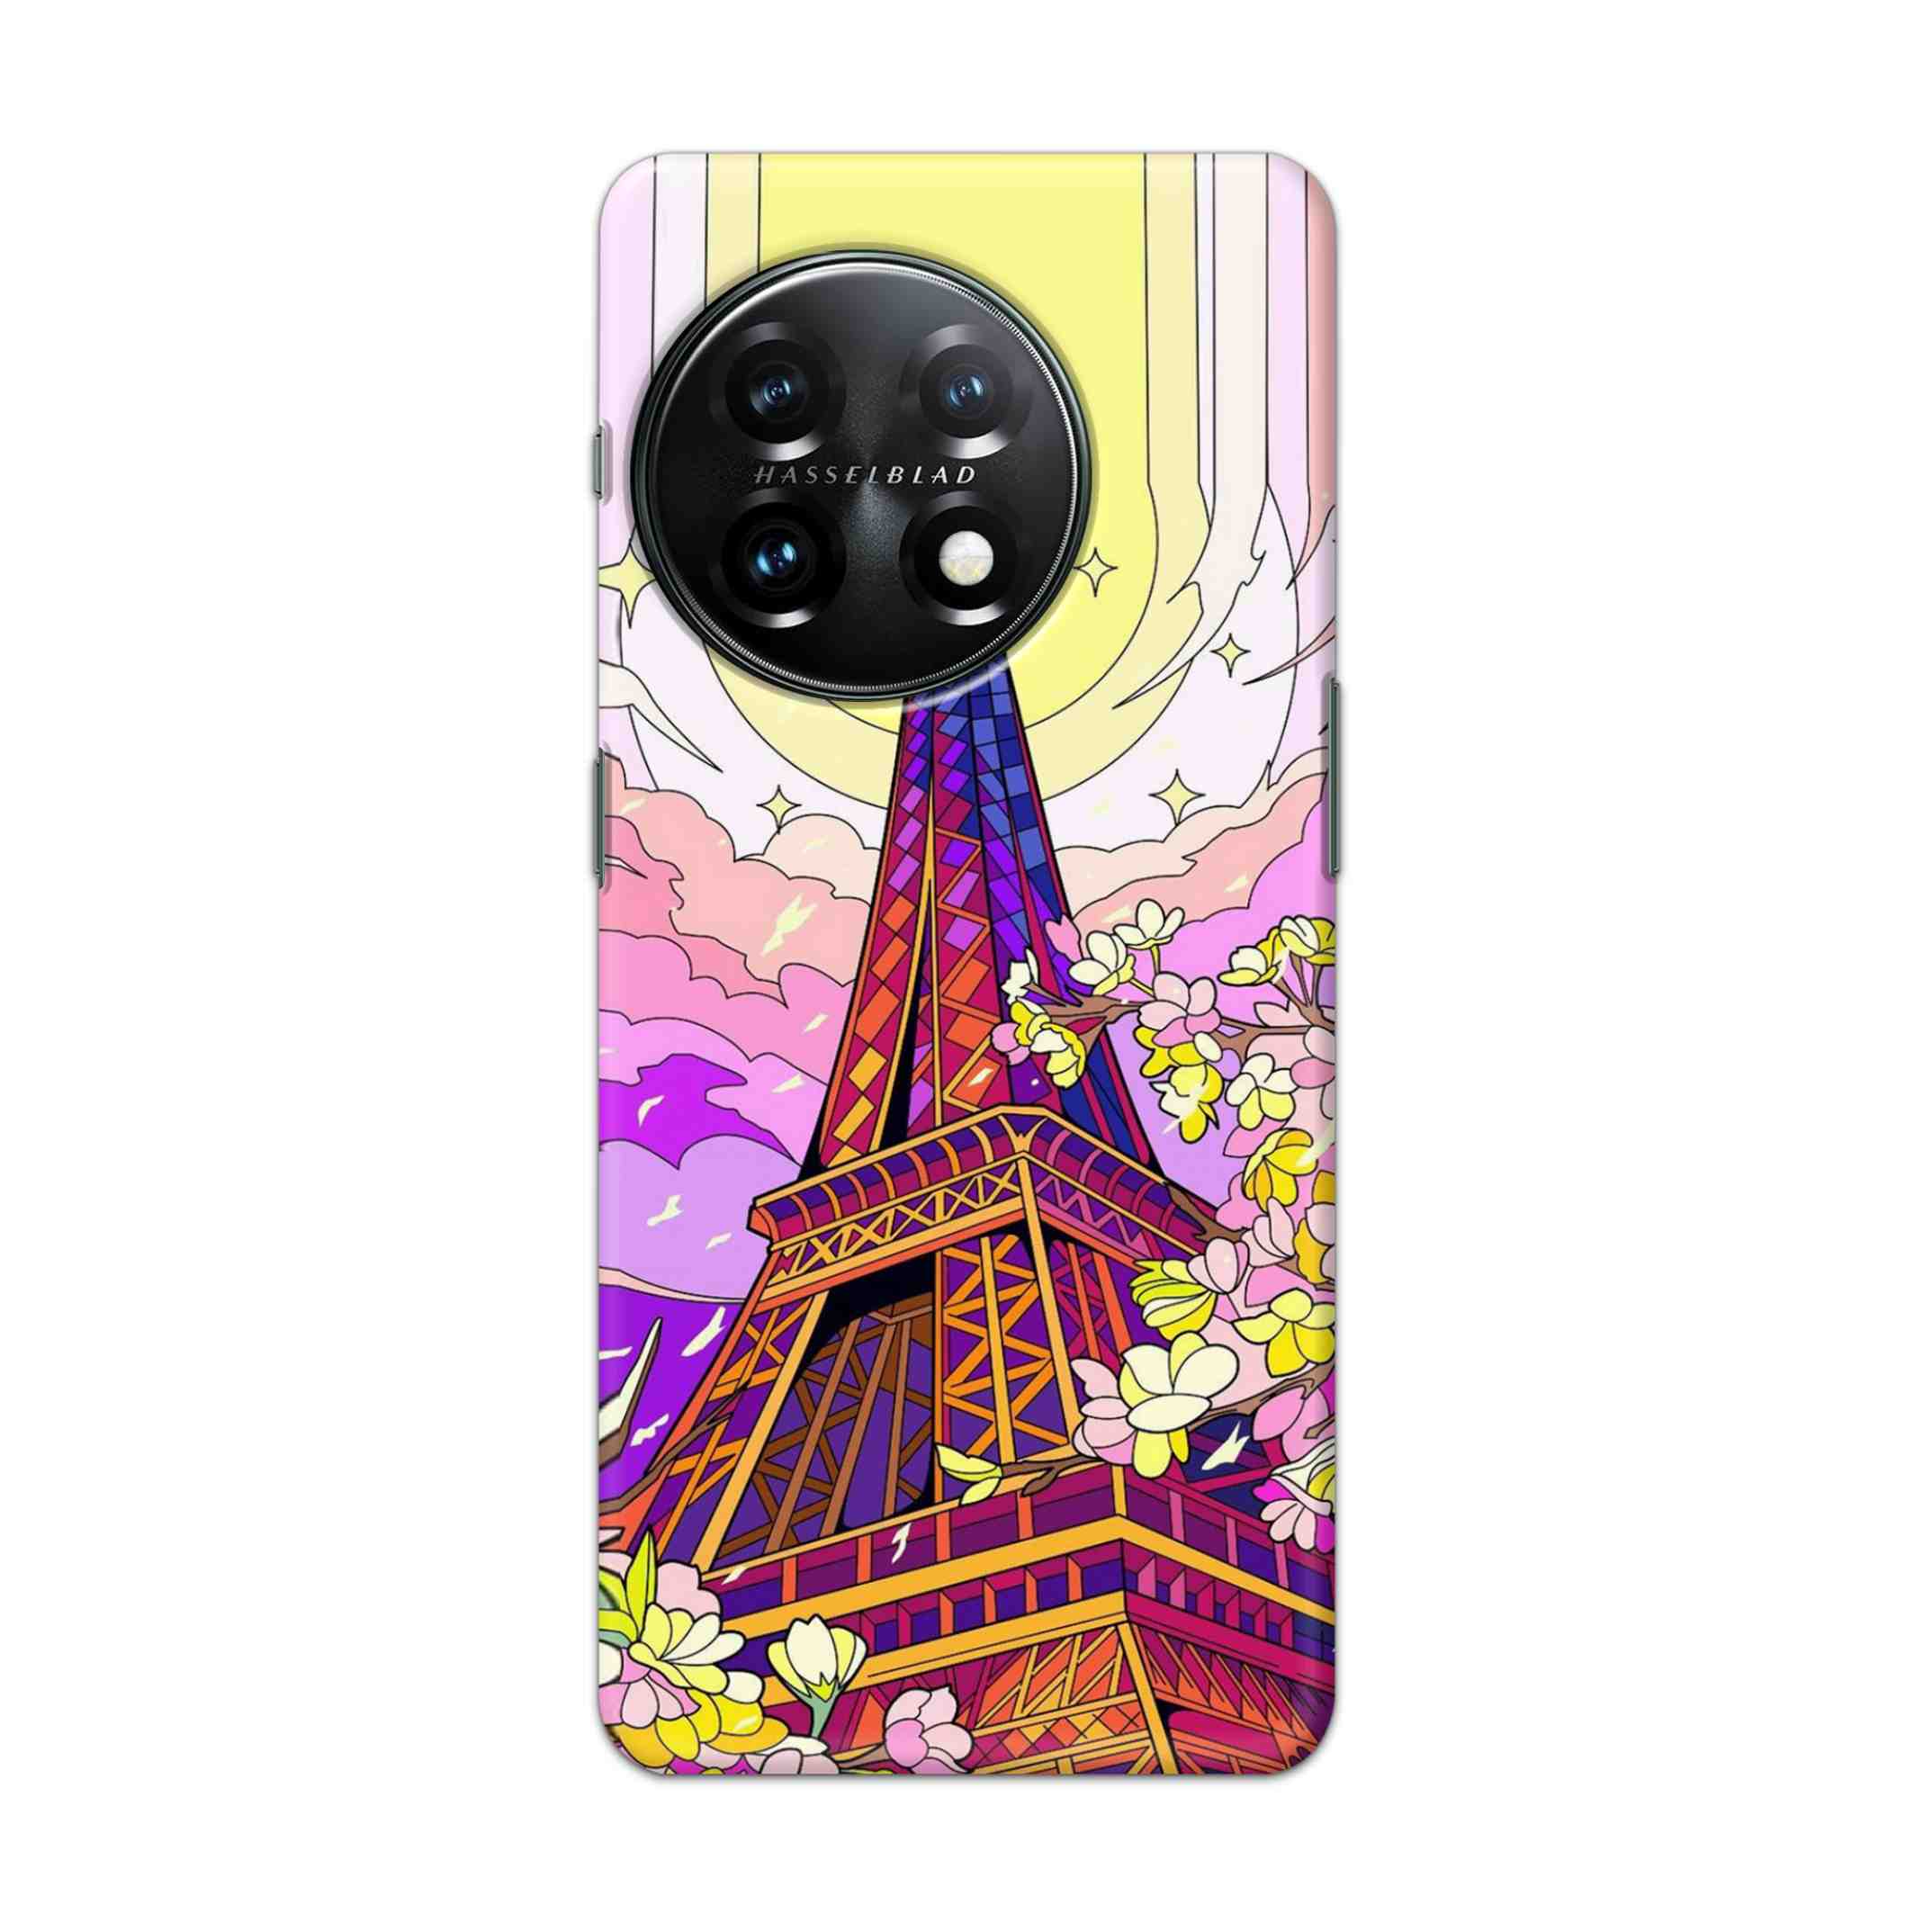 Buy Eiffel Tower Hard Back Mobile Phone Case Cover For Oneplus 11 5G Online